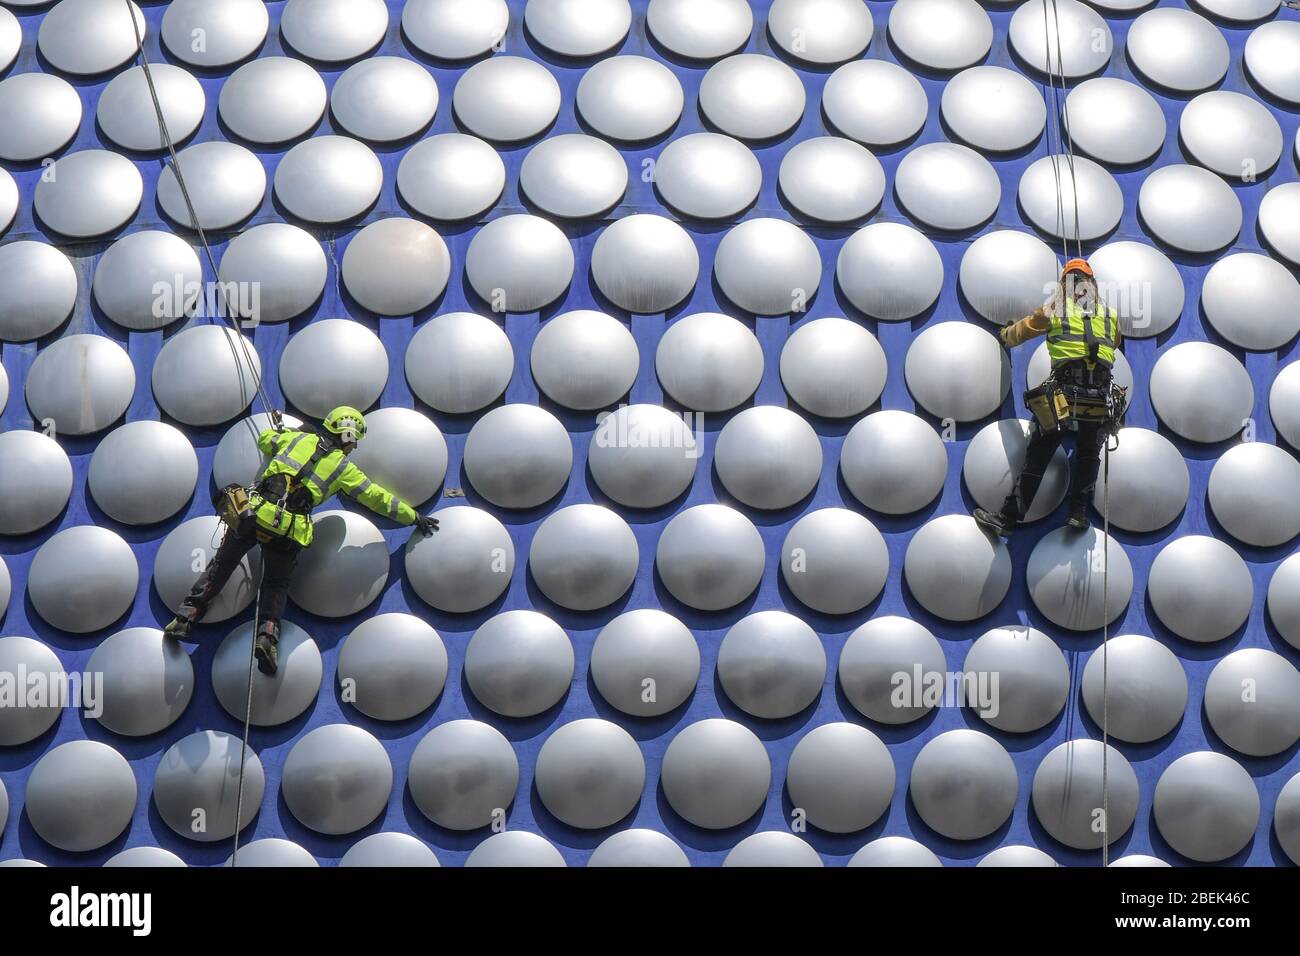 Birmingham, West Midlands, UK. 14th Apr, 2020. Workmen abseil down the exterior of Selfridges in Birmingham city centre to check if any of the discs are loose. The workers have used the lockdown to work without causing major disruption to pedestrians below. Credit: Sam Holiday/Alamy Live News Stock Photo